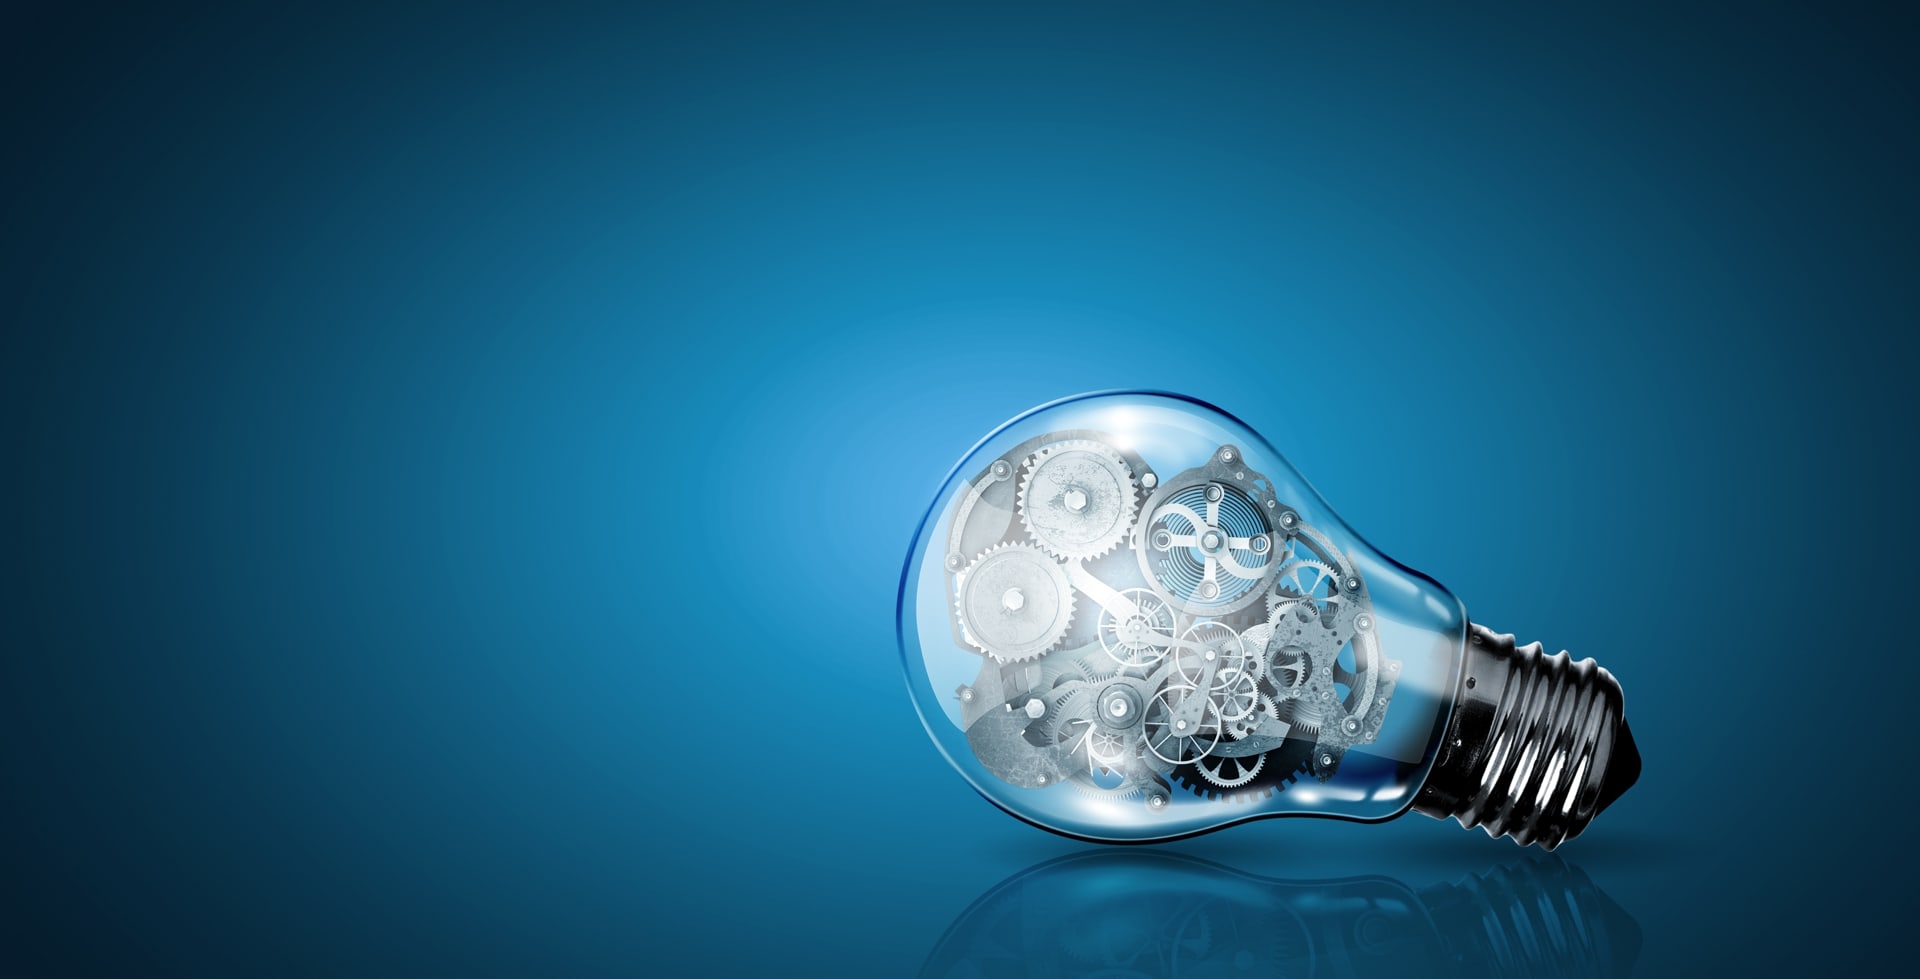 Conceptual image of light bulb with cogwheels inside